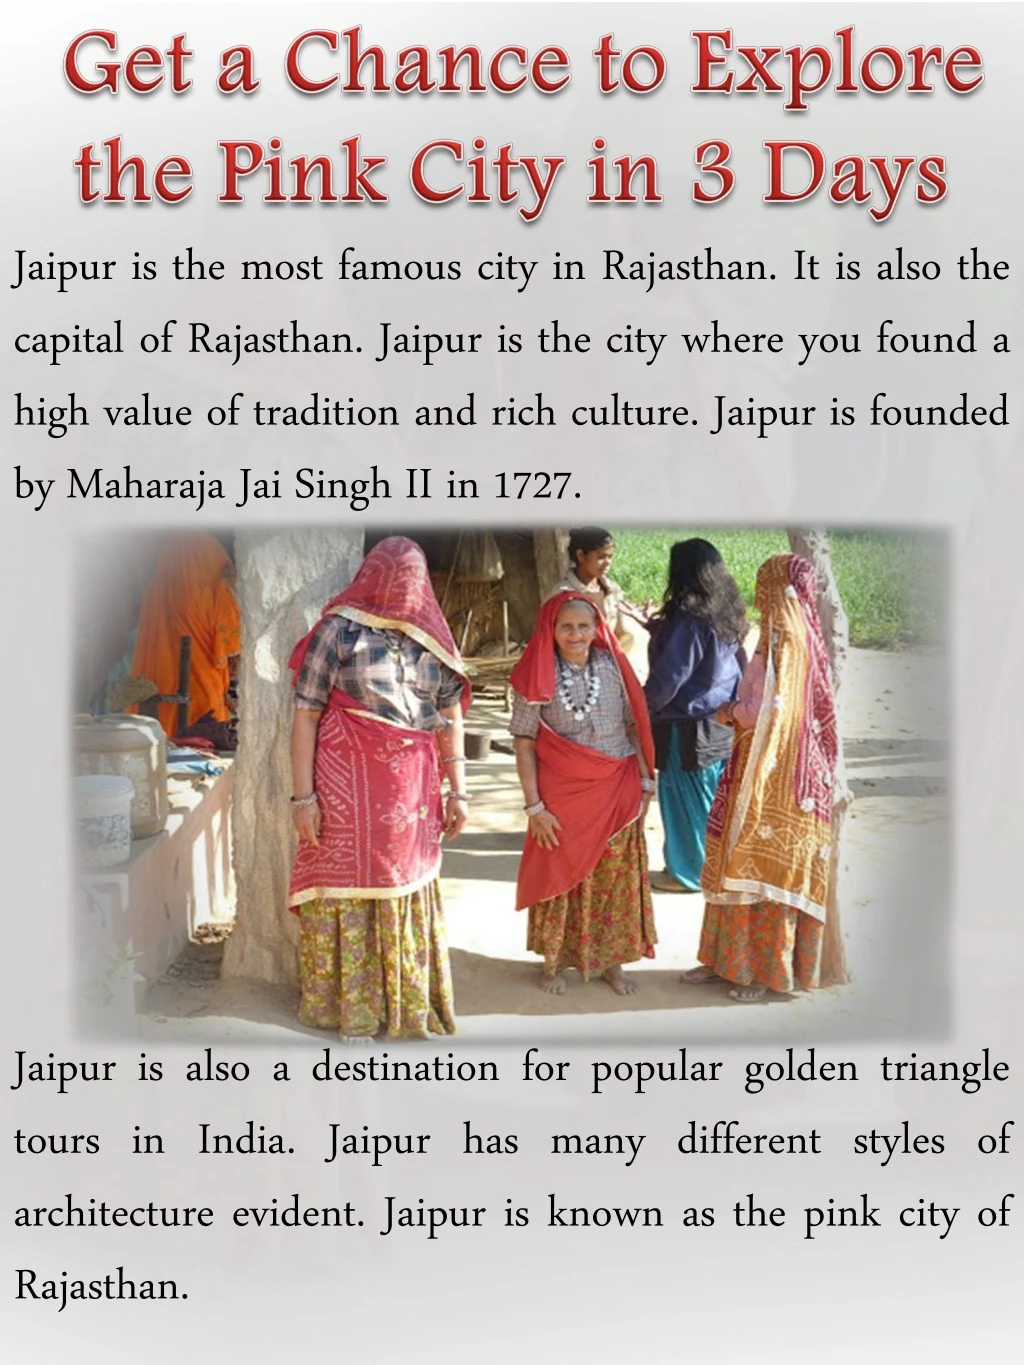 jaipur is the most famous city in rajasthan